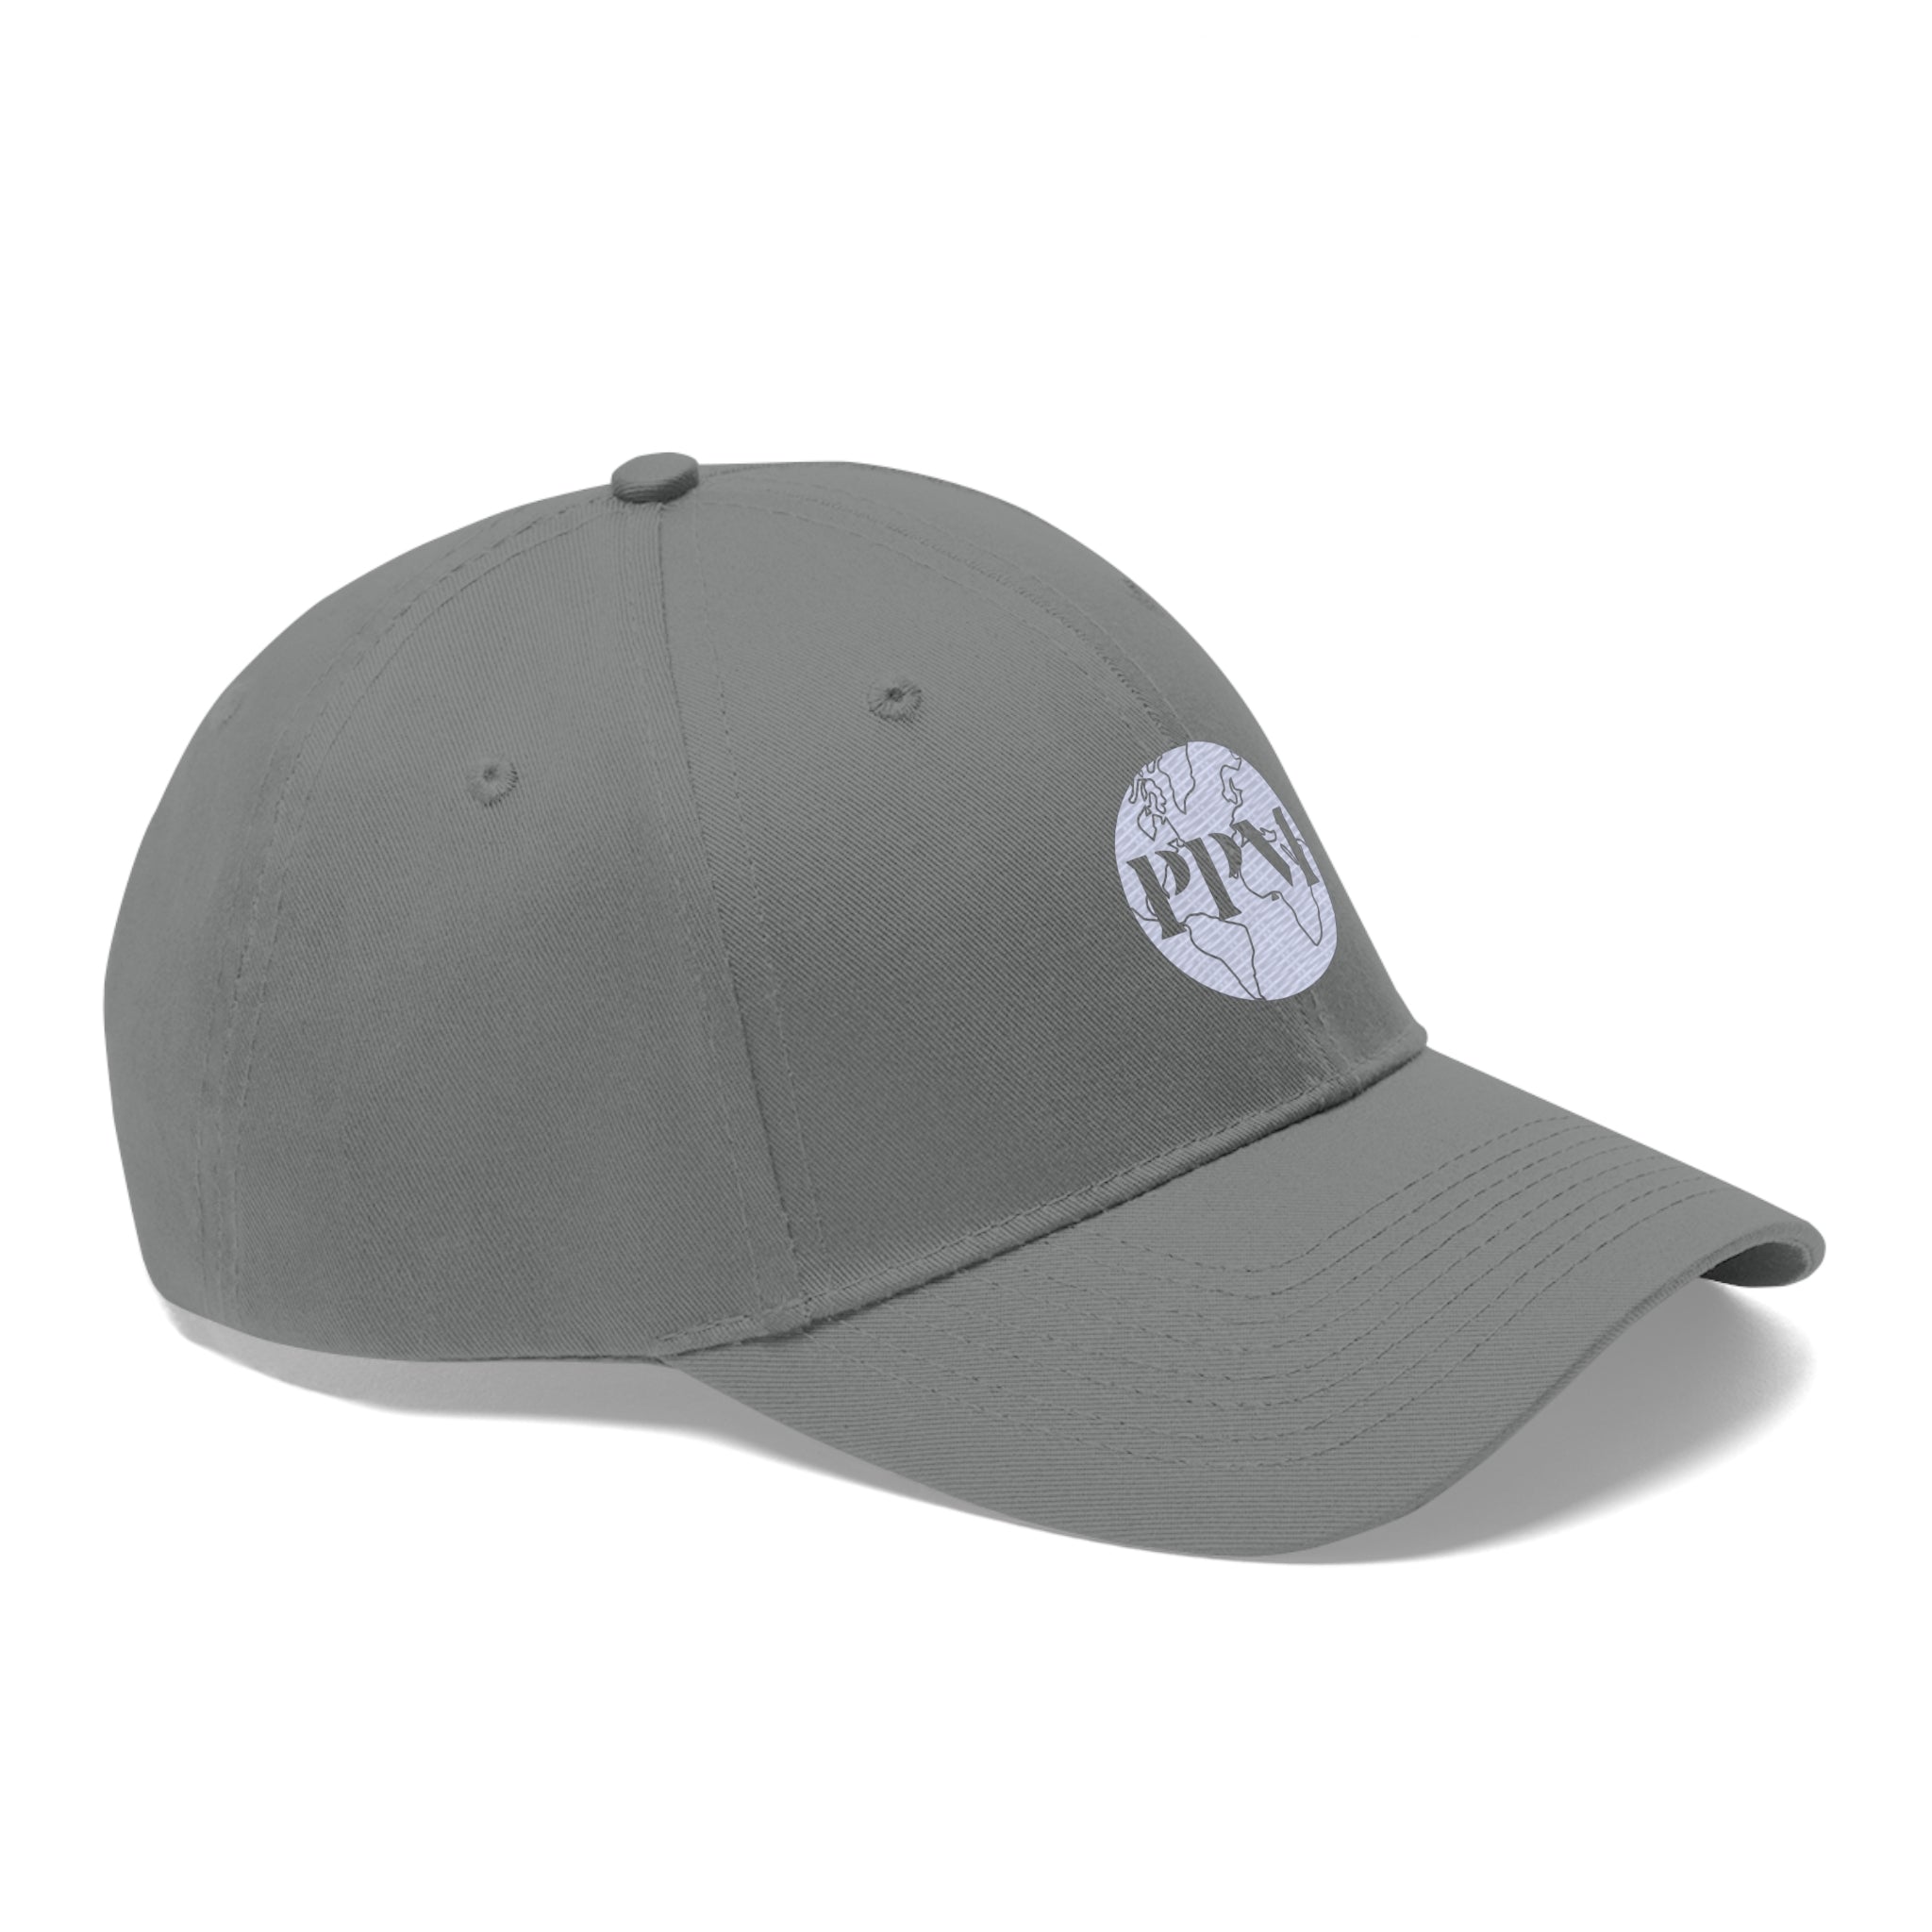 PPM Embroidered Hat